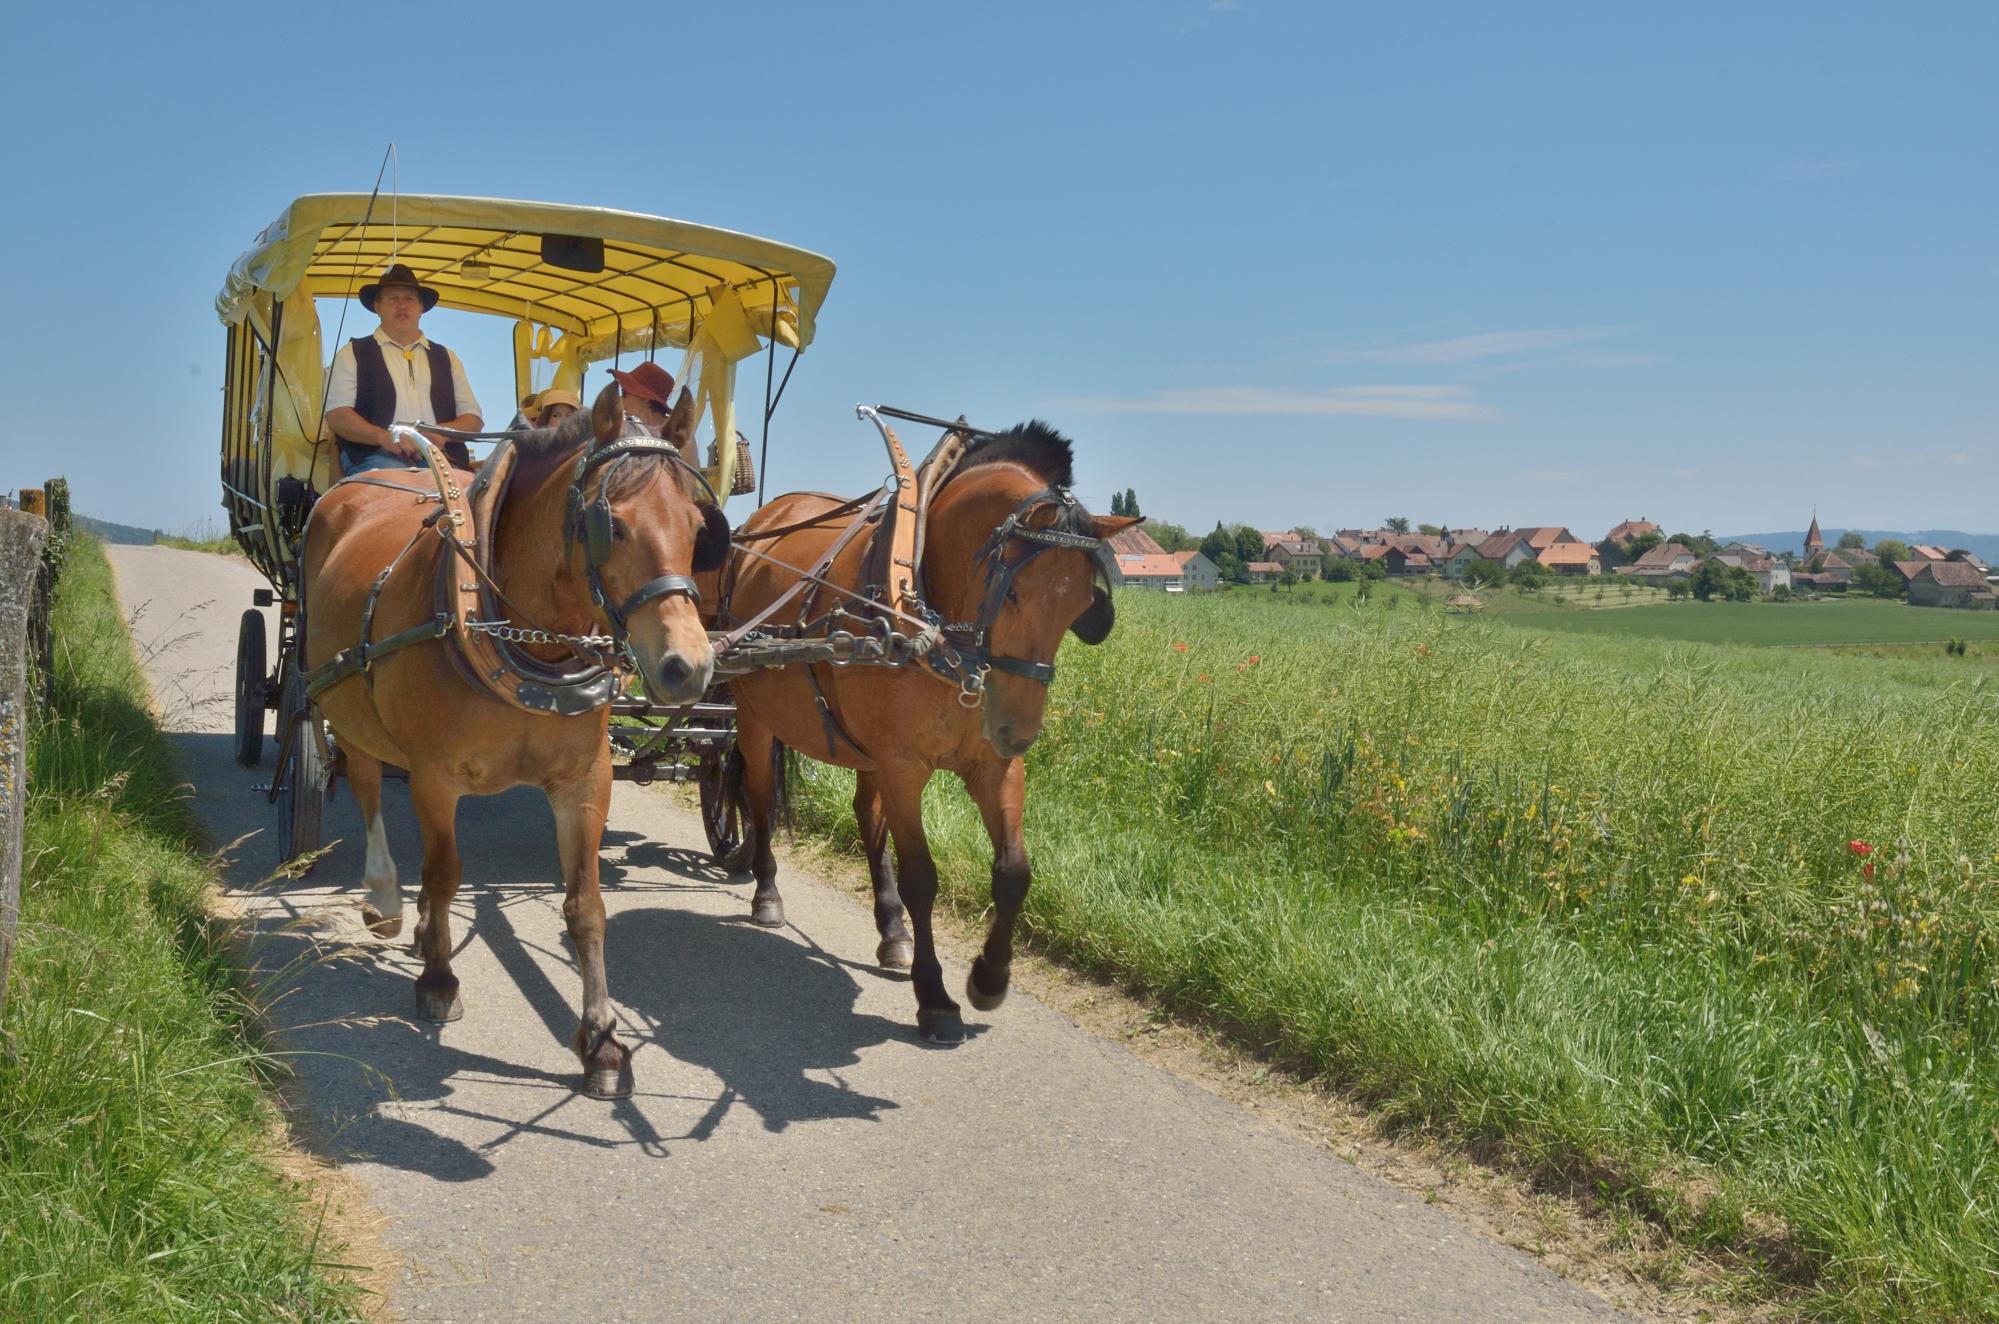 Tour in a horse-drawn carriage